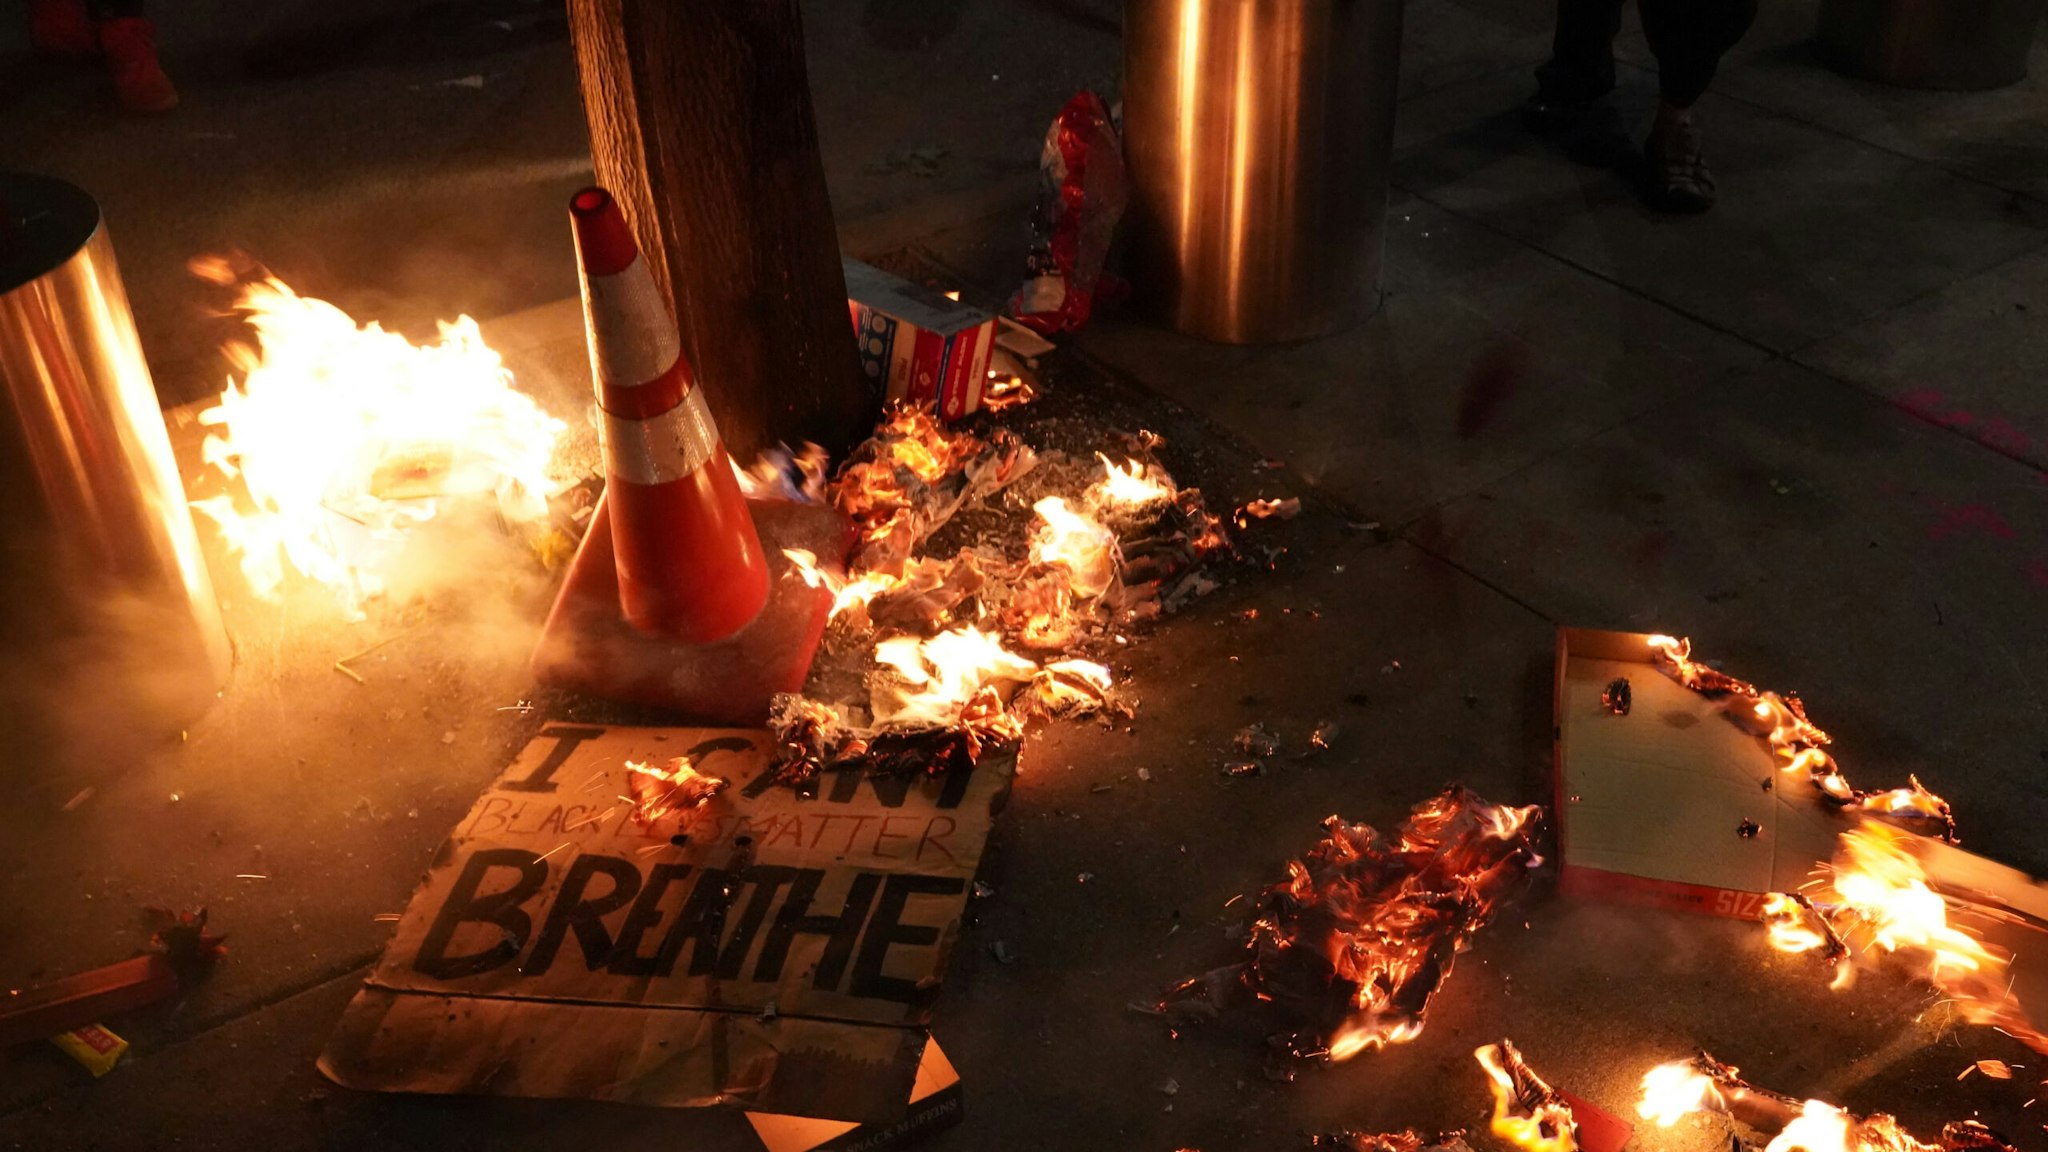 PORTLAND, OR - JULY 20: A fire burns around a sign reading I cant breathe during a protest in front of the Mark O. Hatfield U.S. Courthouse on July 201, 2020 in Portland, Oregon. Monday night marked 54 days of protests in Portland following the death of George Floyd in police custody. (Photo by Nathan Howard/Getty Images)